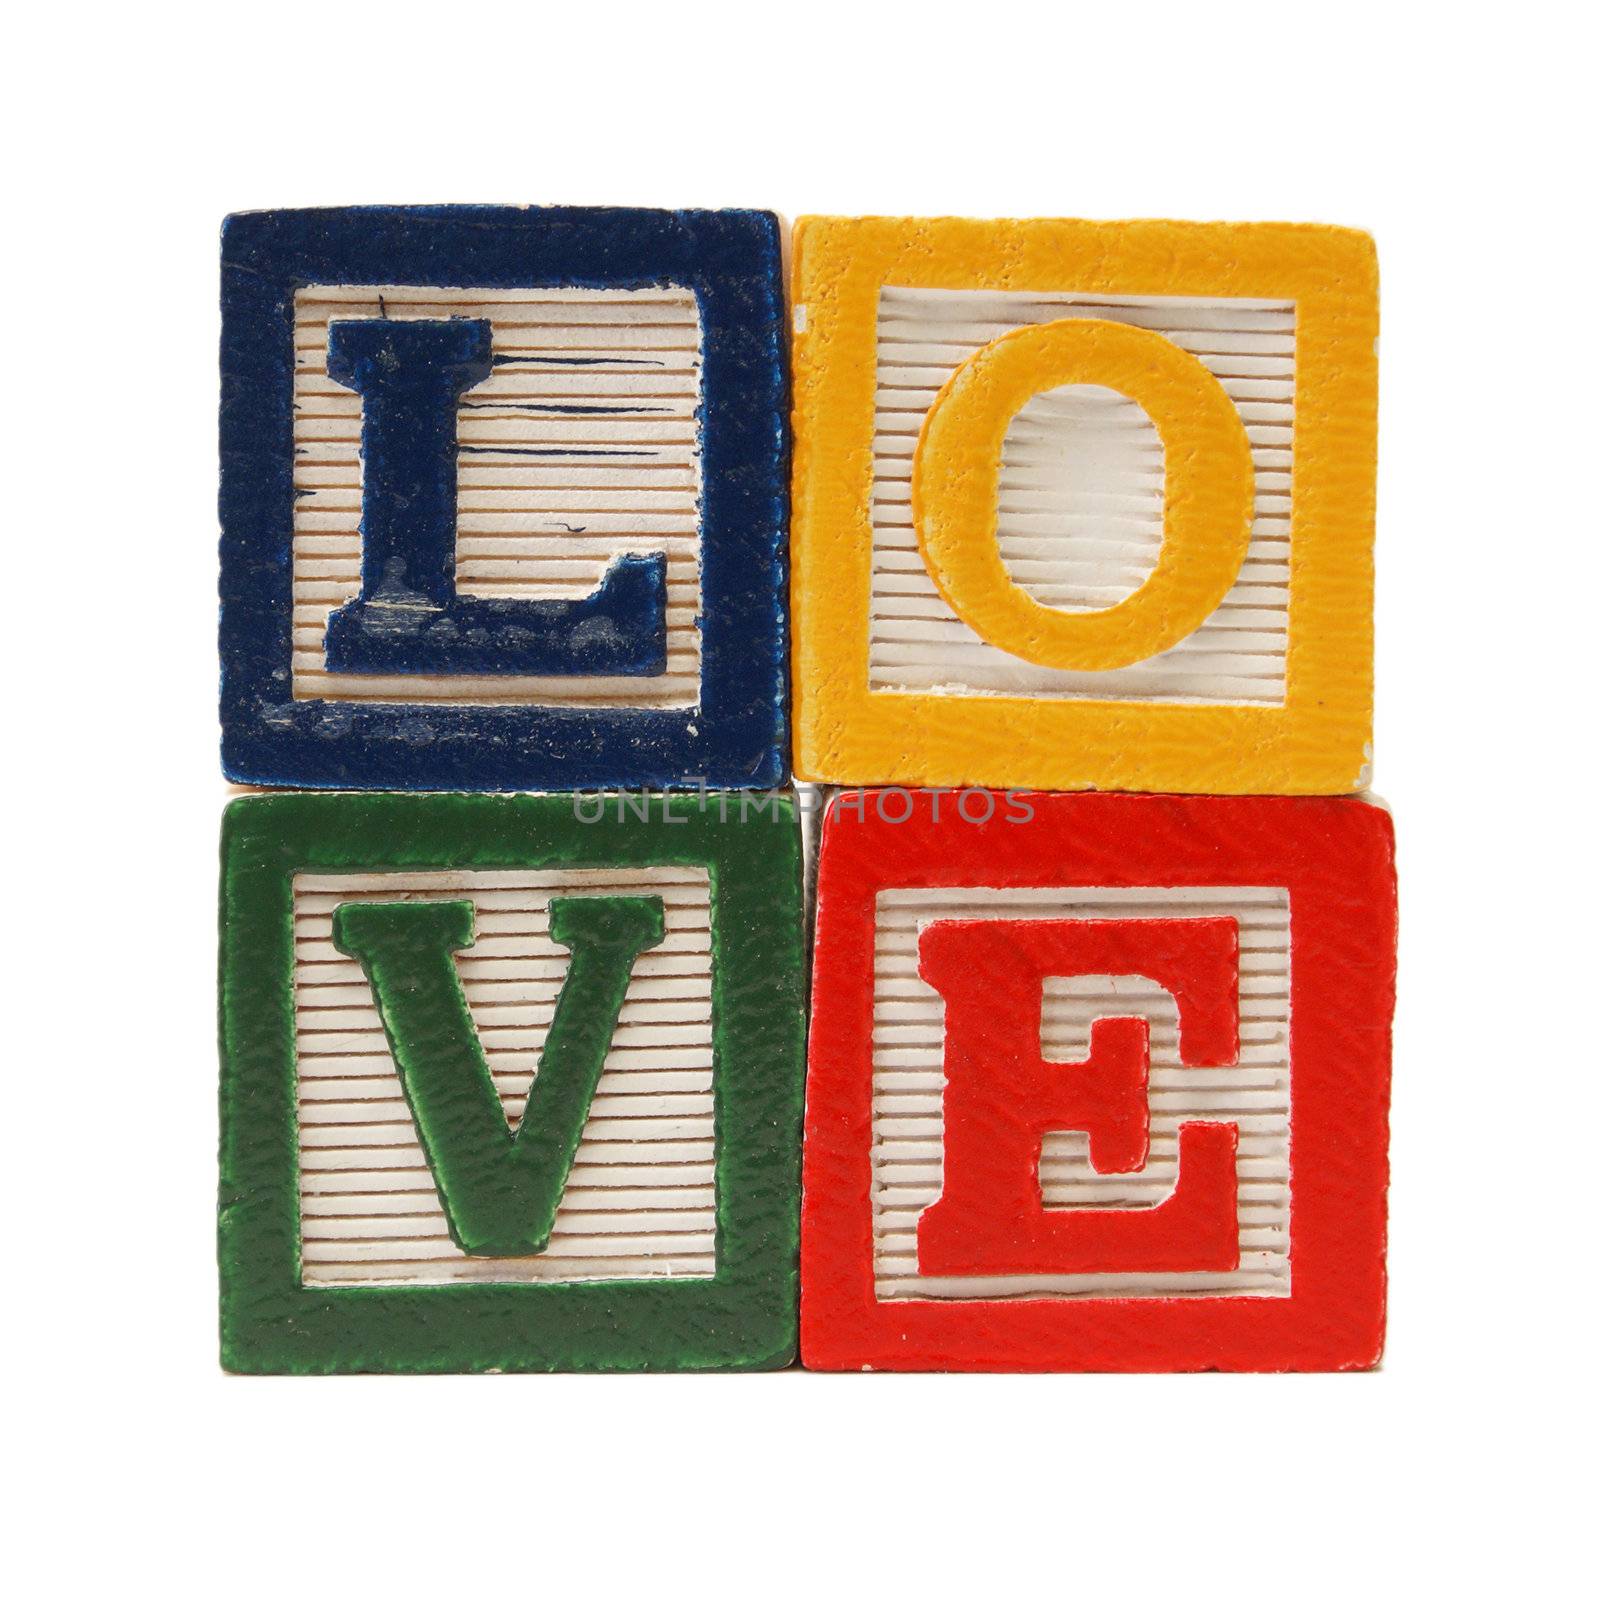 Alphabet blocks are used to create the word love in the shape of a square.